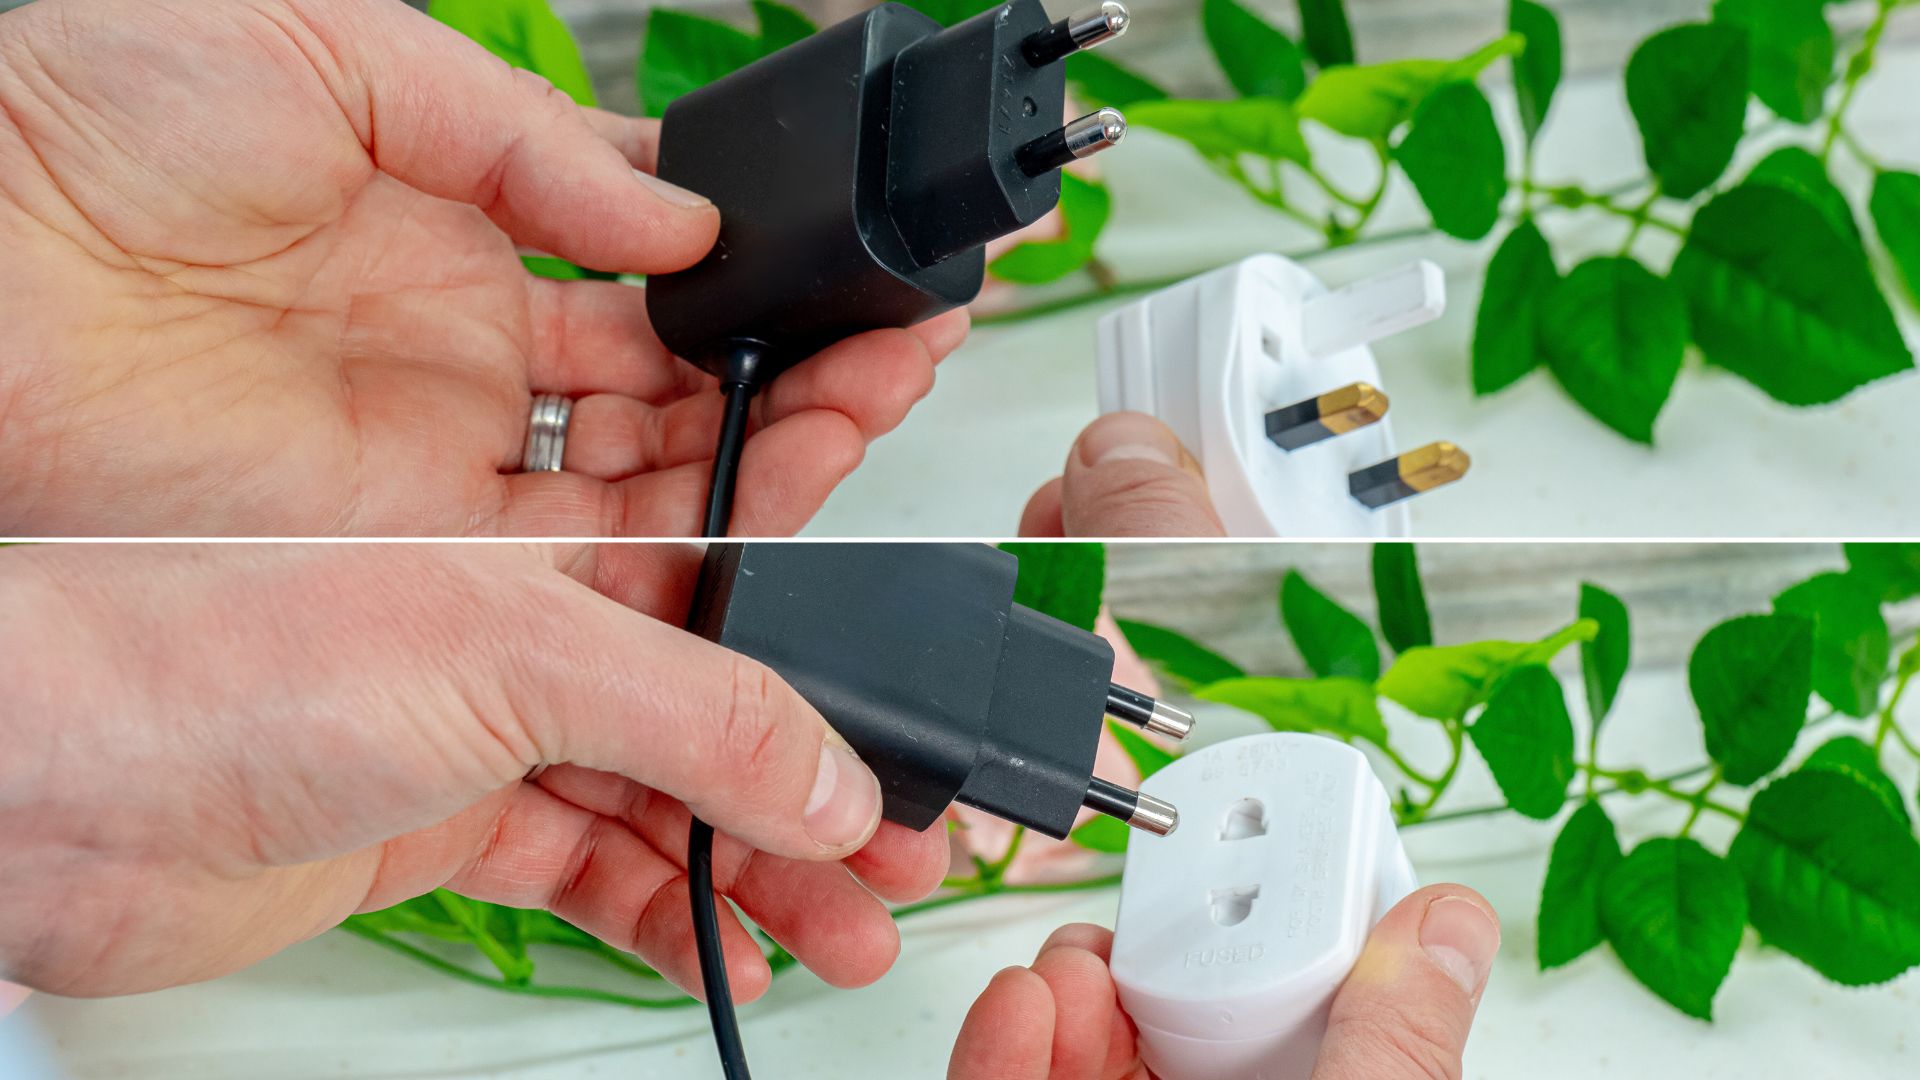 European to American Adapter / 3 Pins,Adaptadores,The function of the  European American adapter is to allow electronic devices with European  plugs to